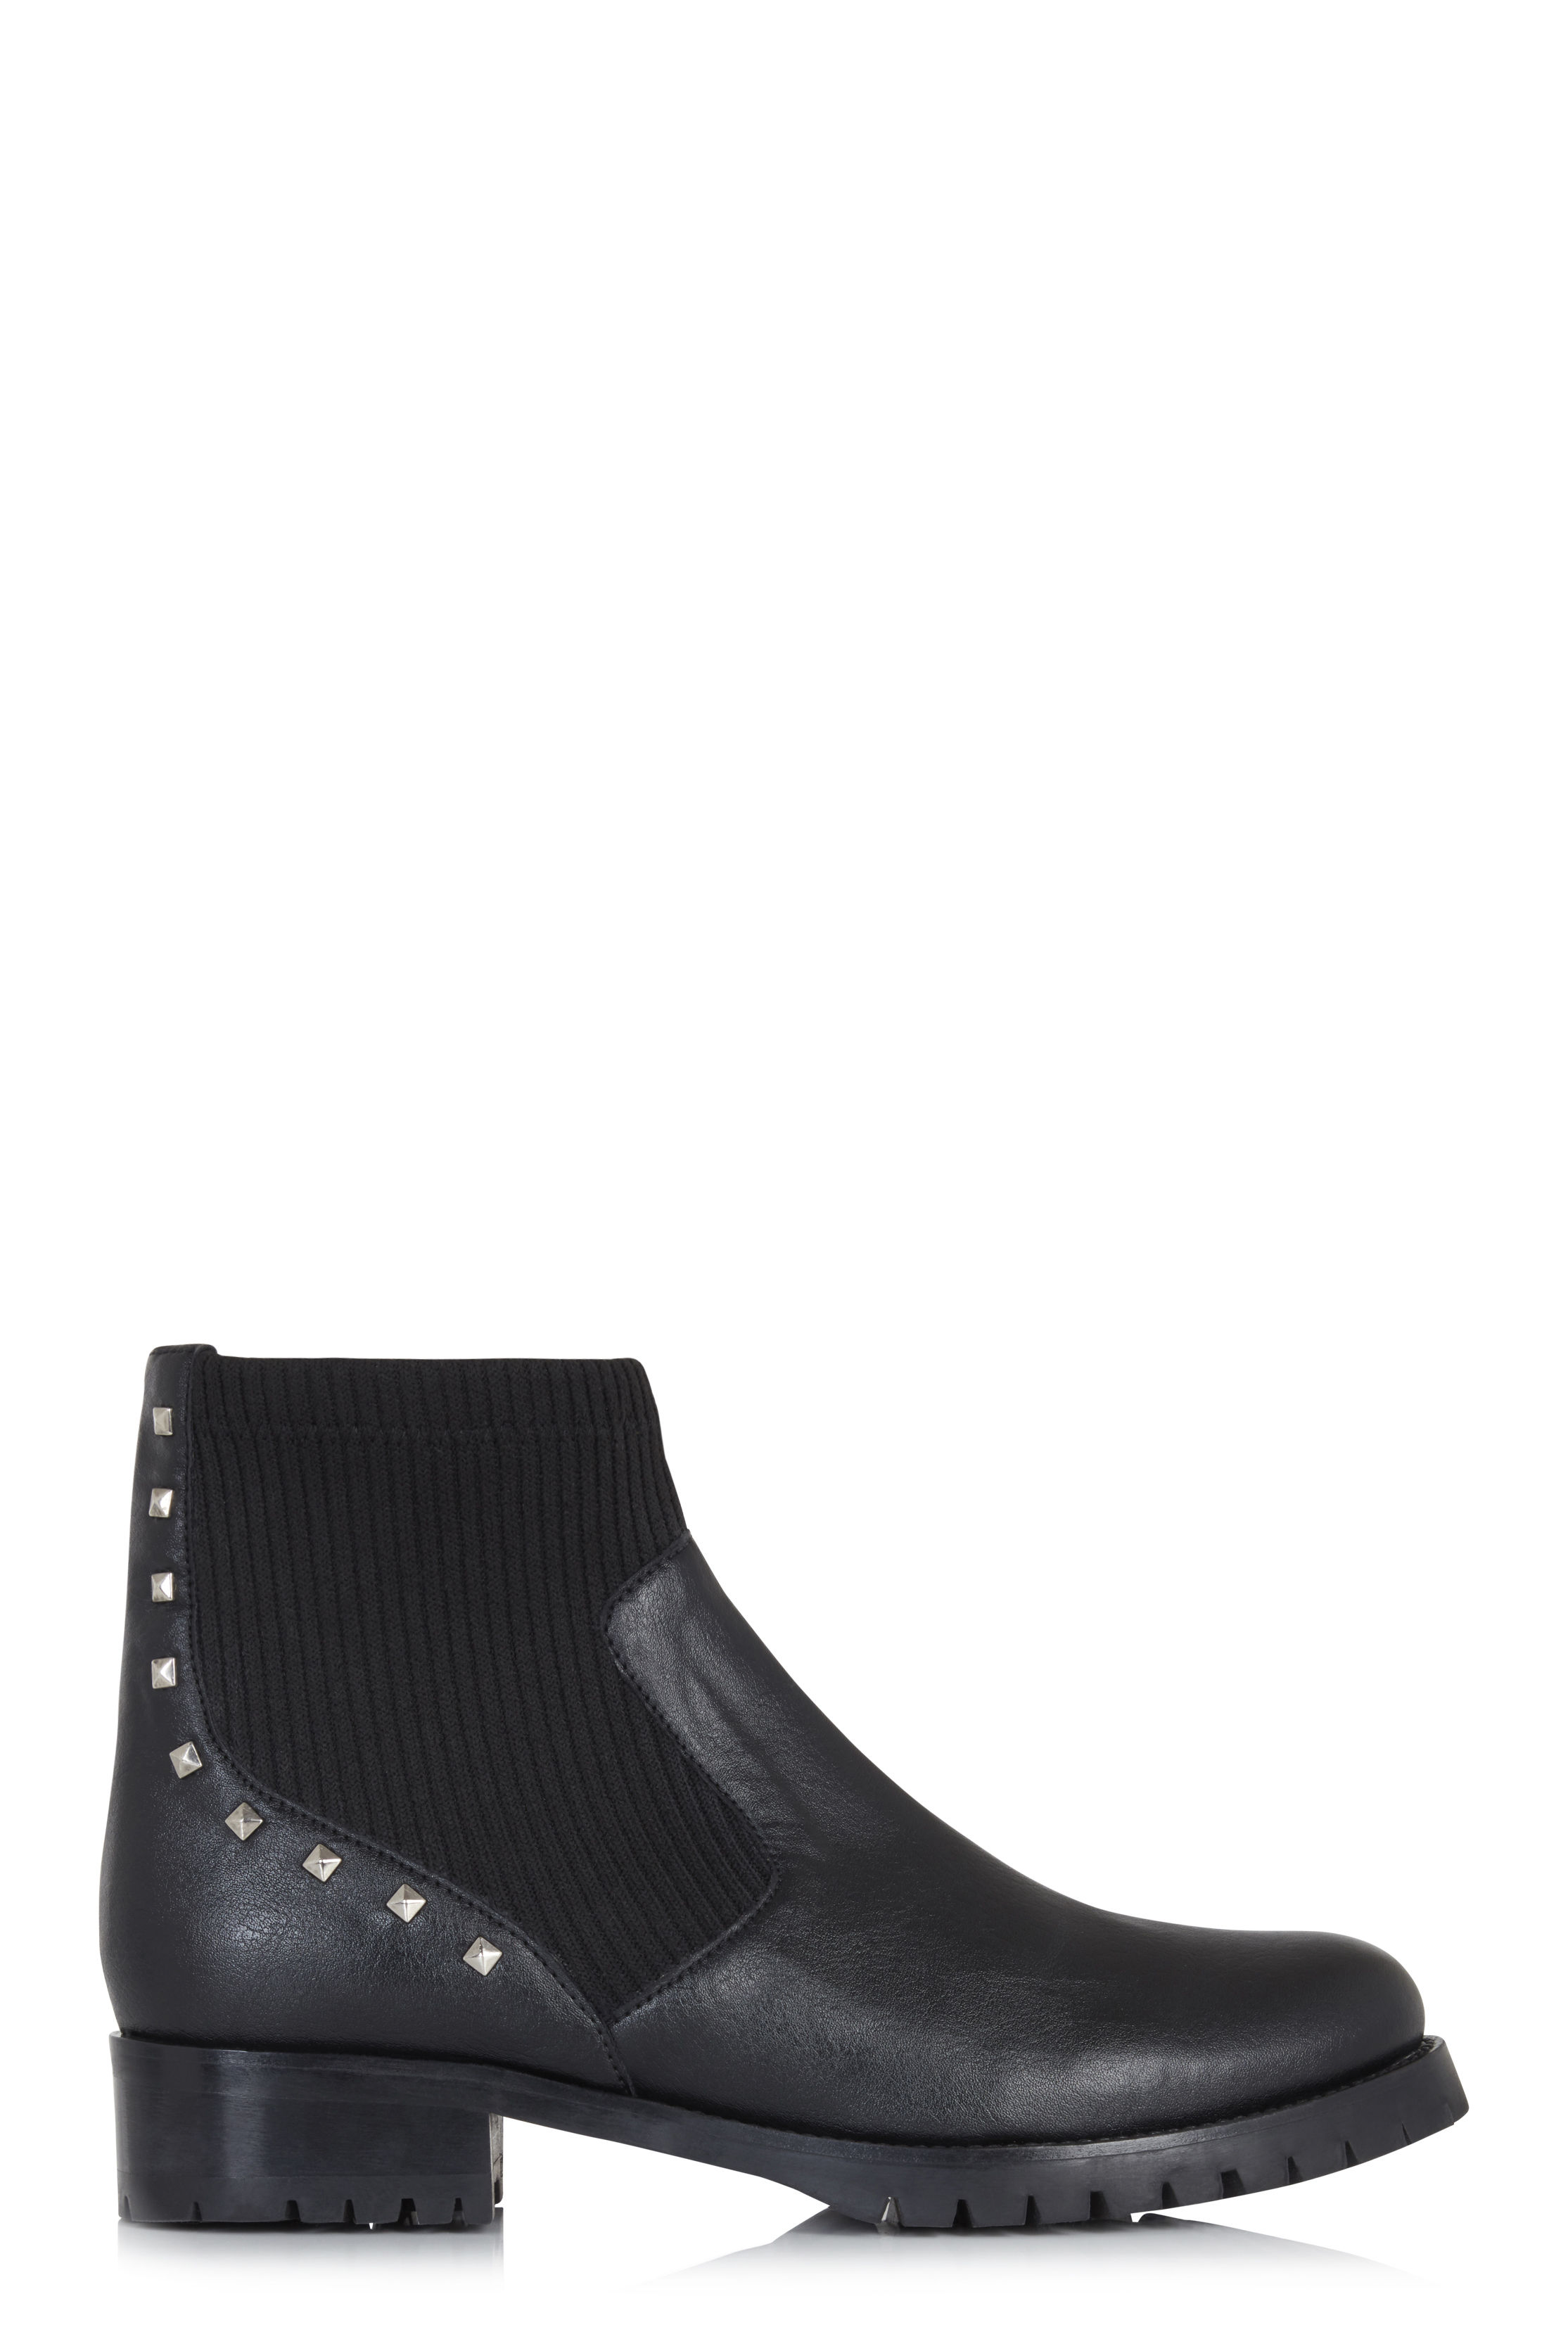 LTS Simmone Elasticated Ankle Boot | Long Tall Sally